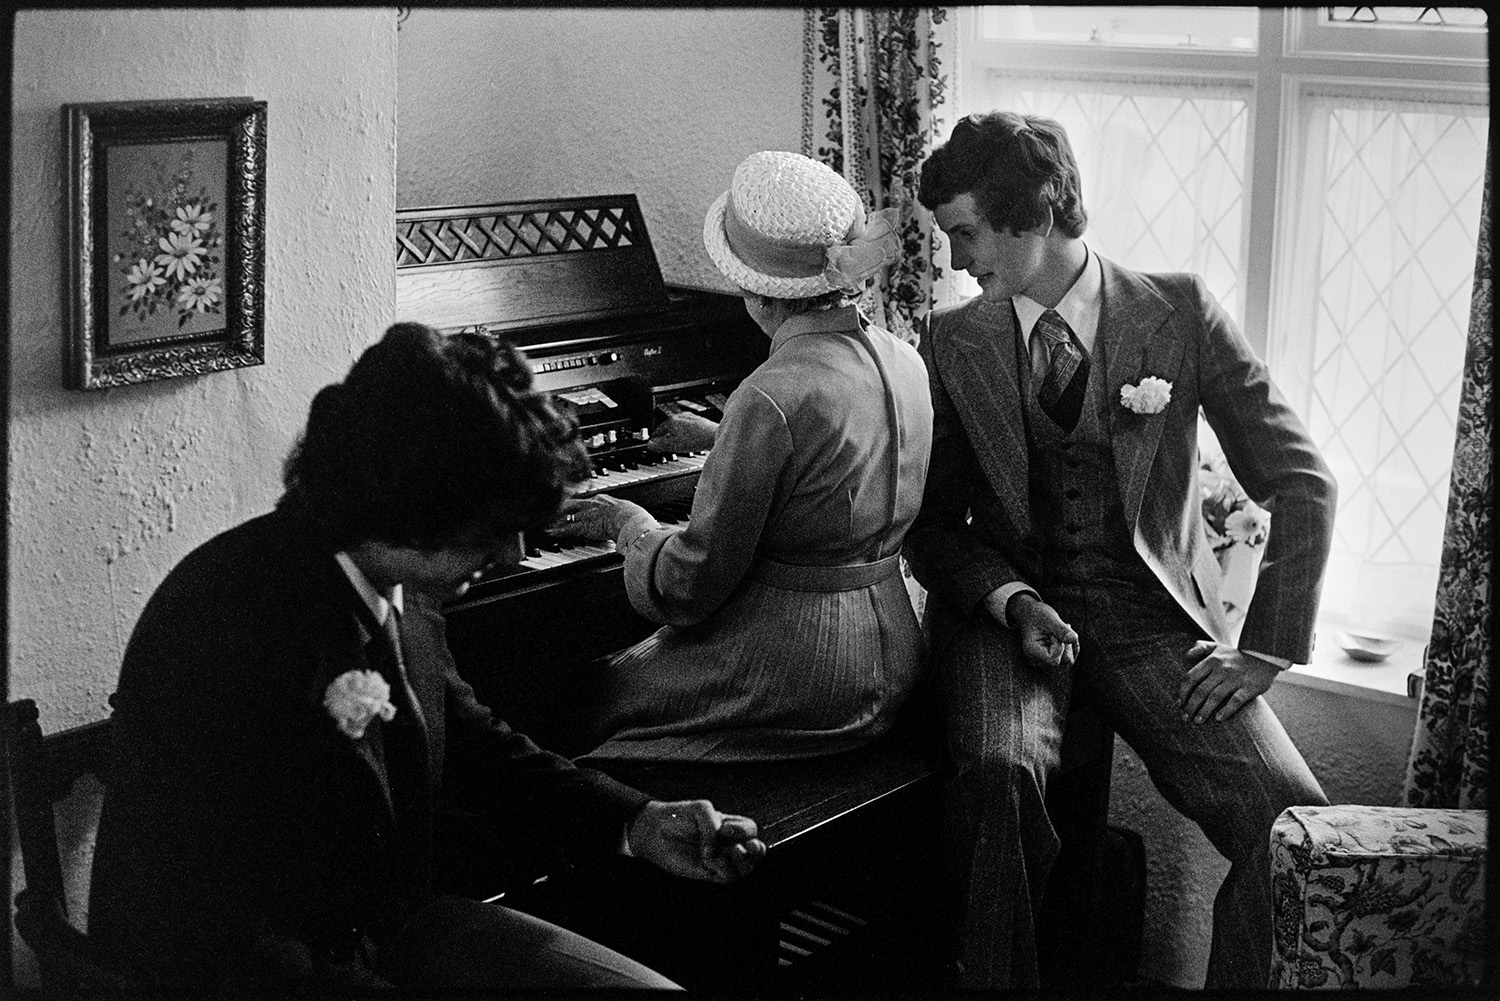 Two men listening to a woman playing an electric organ in a living room. They are wearing buttonholes and have possibly come from or a going to a wedding.